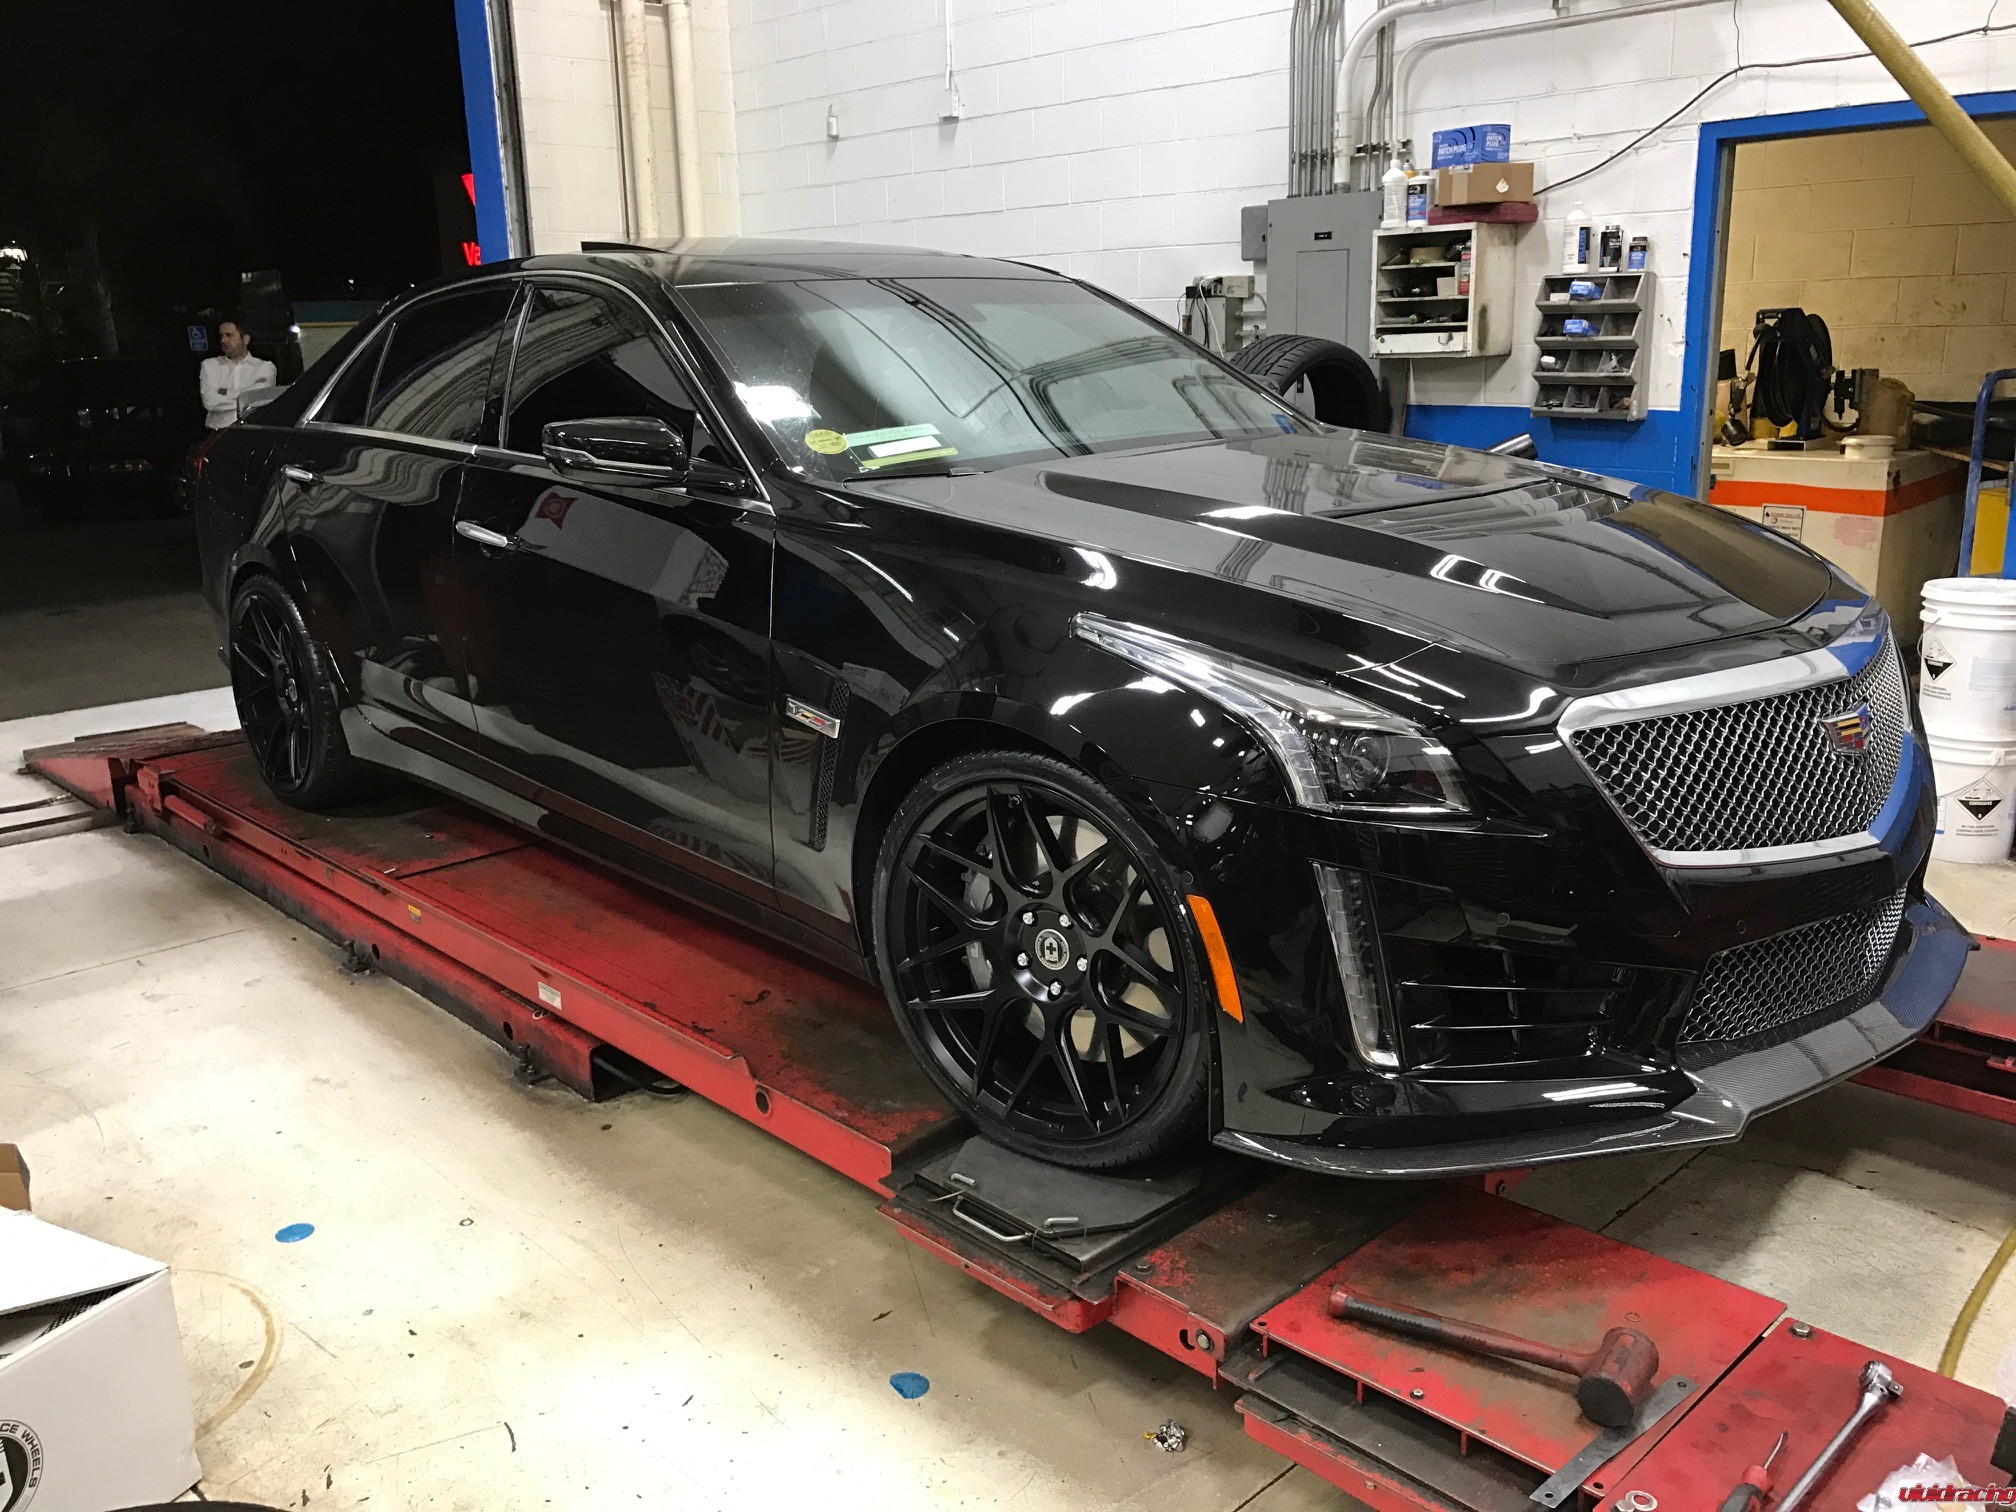 Cadillac carbon black package, HRE wheels, flow form, FF01, CTS-V